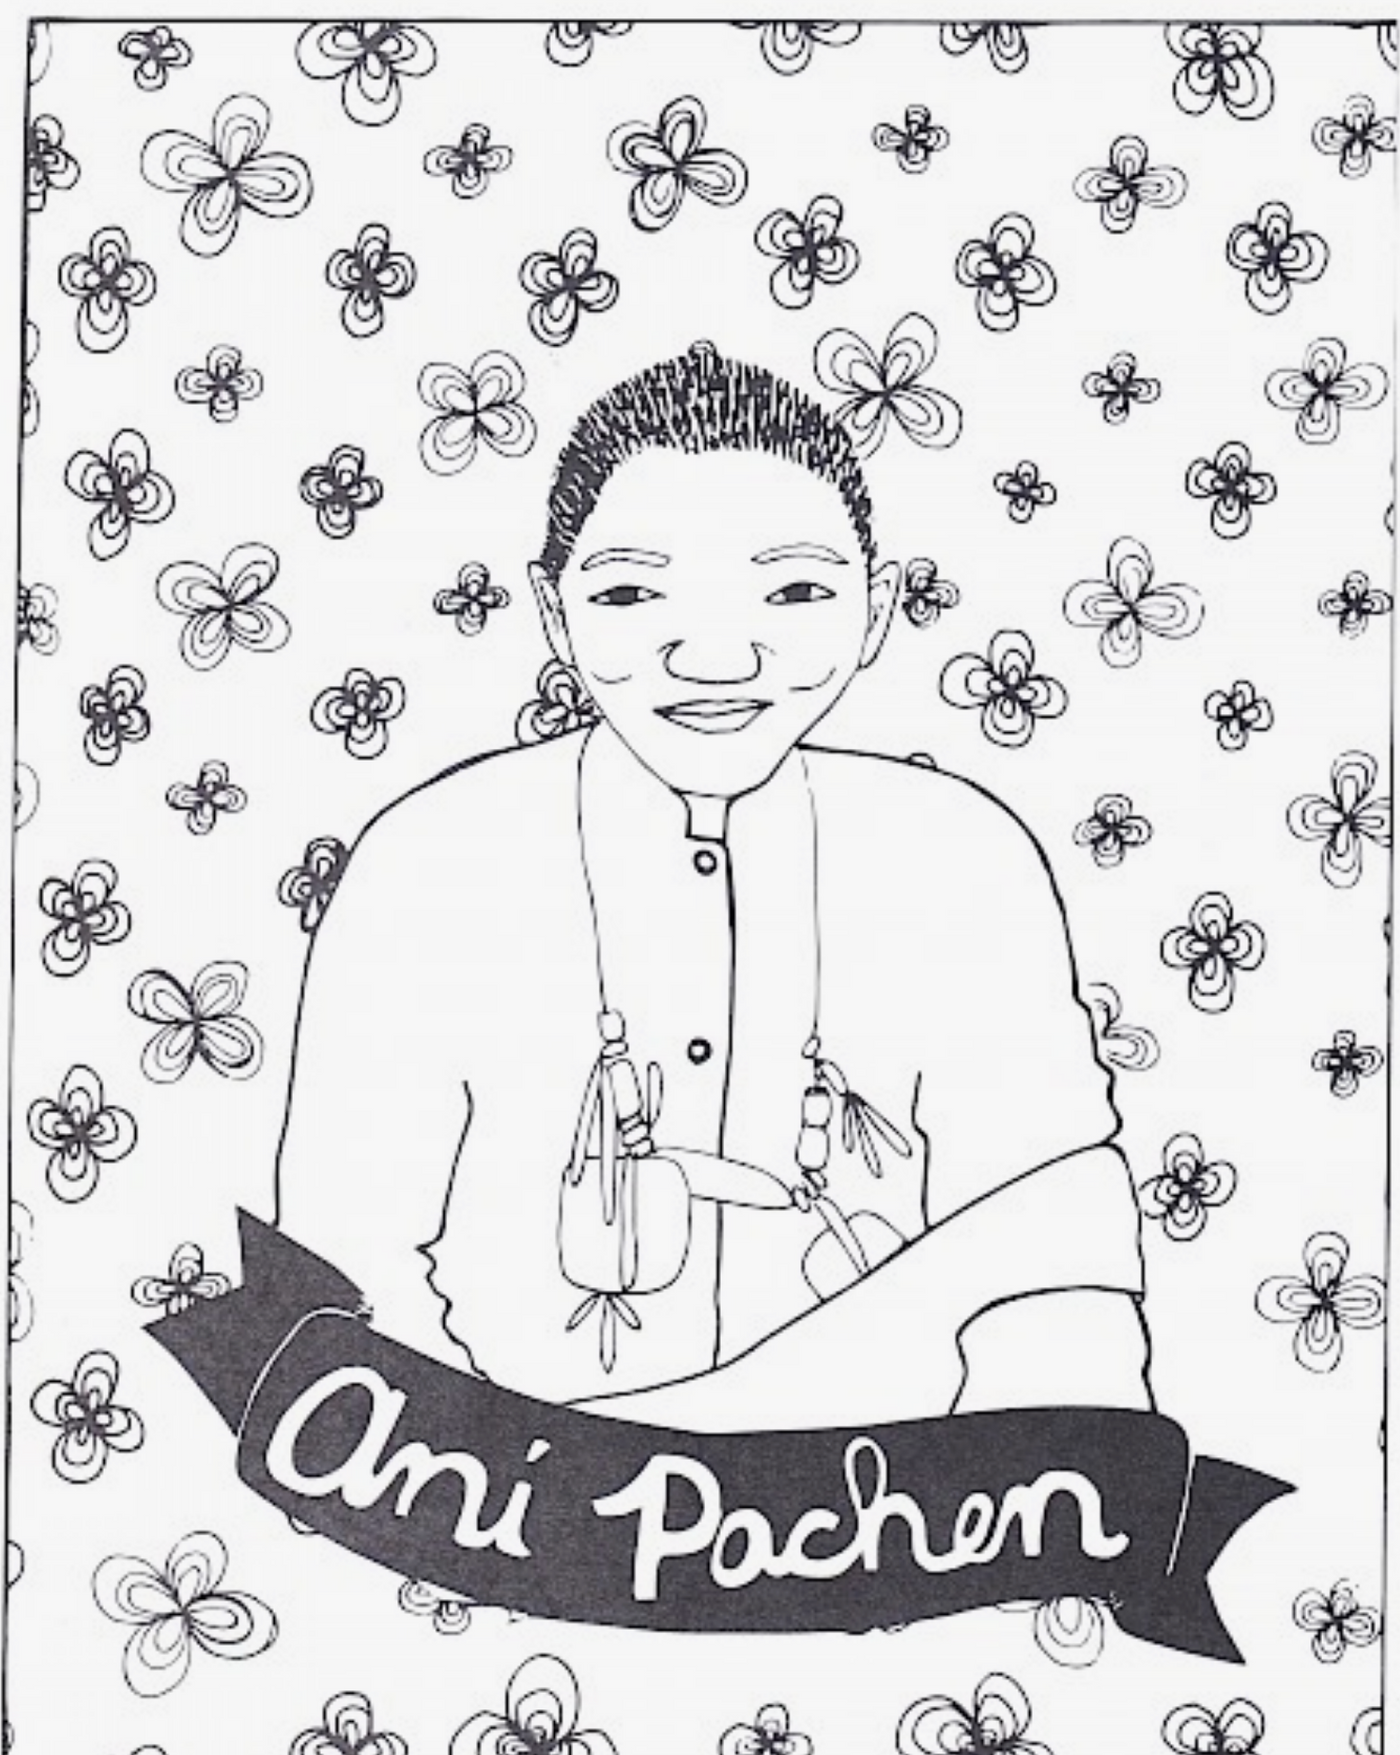 Zine / pamphlet. Published by microcosm! Full of colorable pages and bios of nuns who broke from the norm, from the middle ages to the present day. Including pioneering musicians, artists, scientists, activists, educators, freedom fighters, and adventurers.  Made in United States of America.